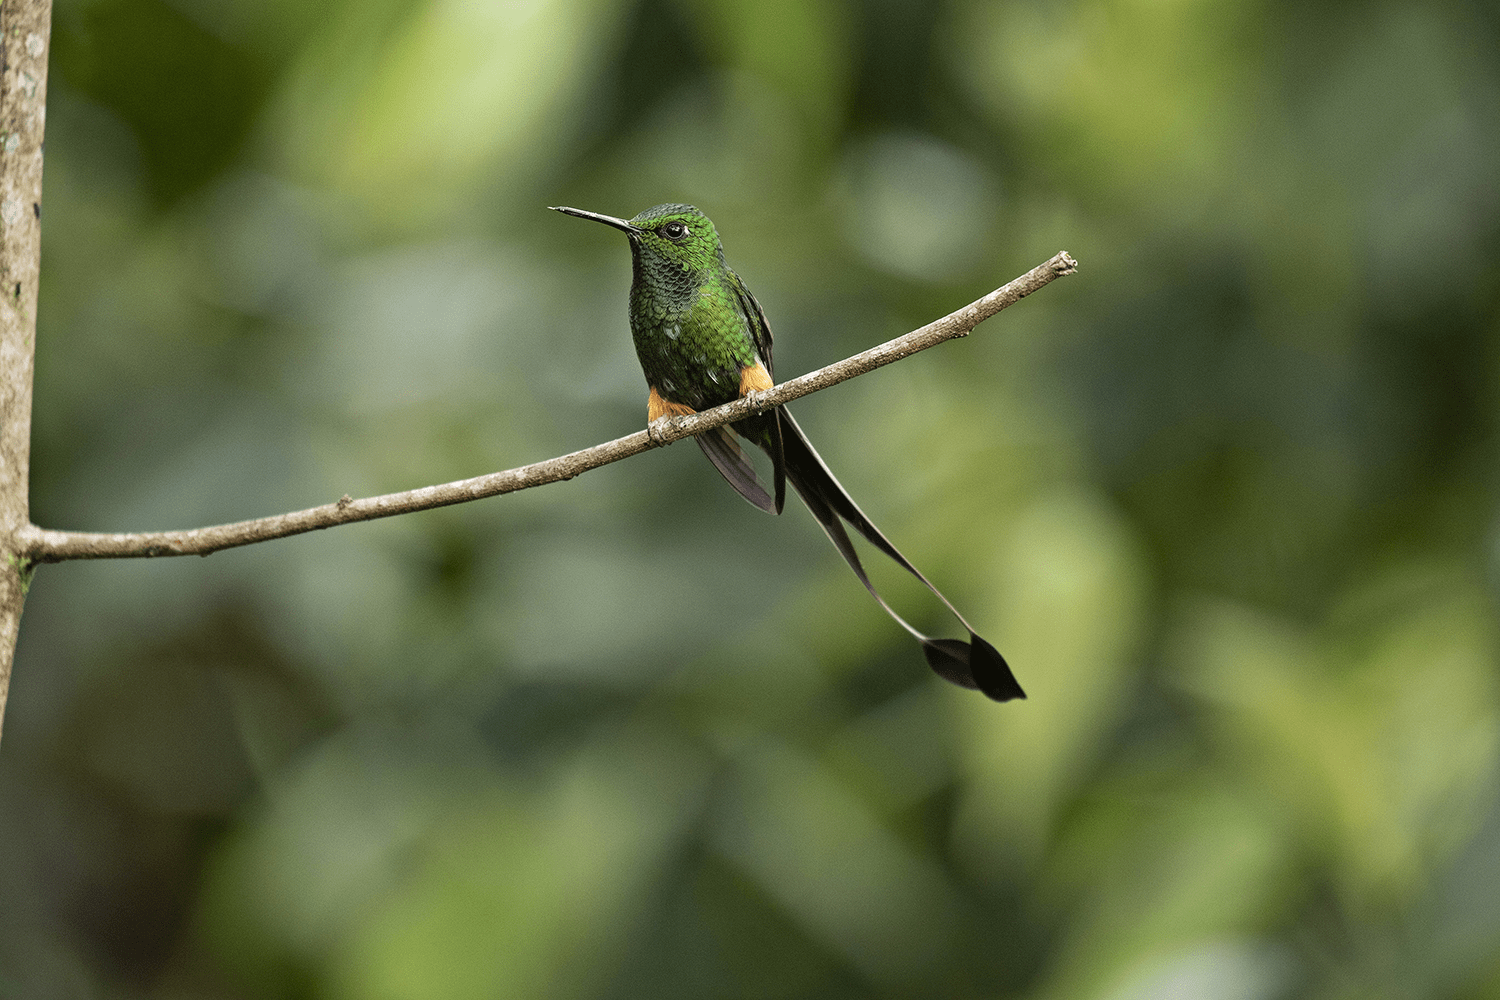 Protected natural areas are the habitat of 95% of Peru’s bird species. The conservation of their ecosystems ensures the life of these and other species. In the photo, a hummingbird from the Alto Mayo Protected Forest (San Martin).